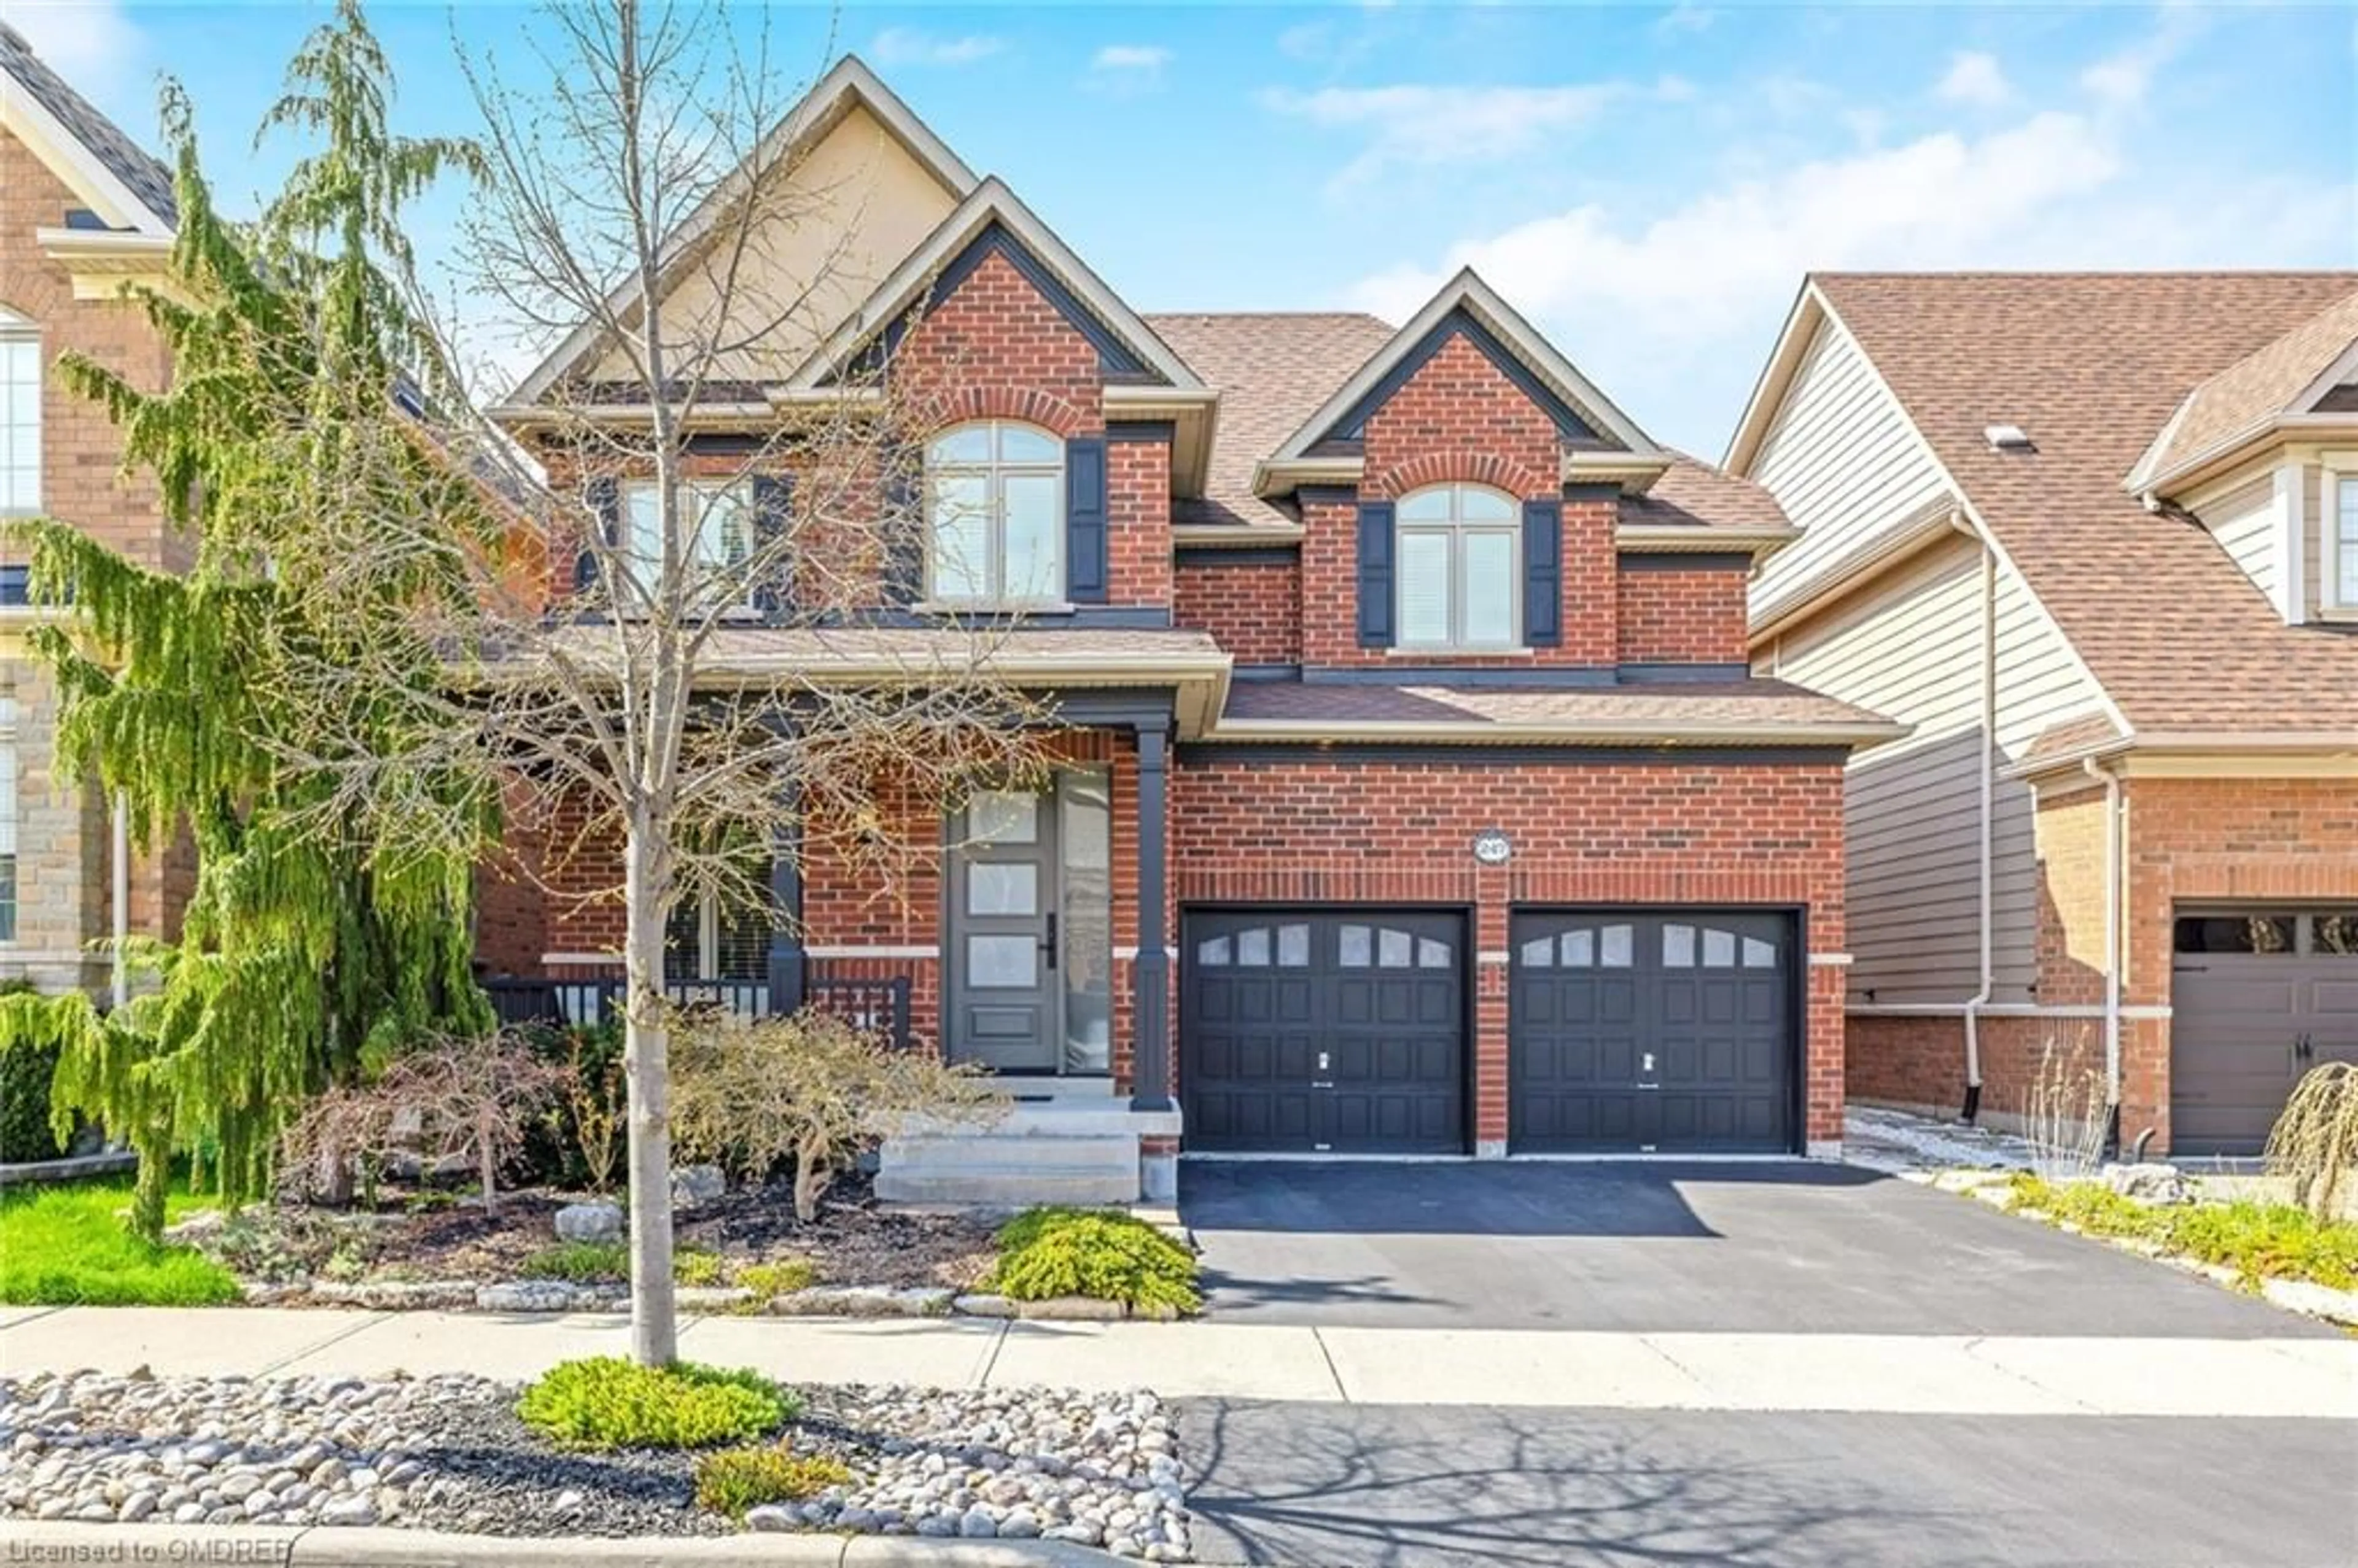 Home with brick exterior material for 247 Huntingford Gate, Milton Ontario L9T 0S4